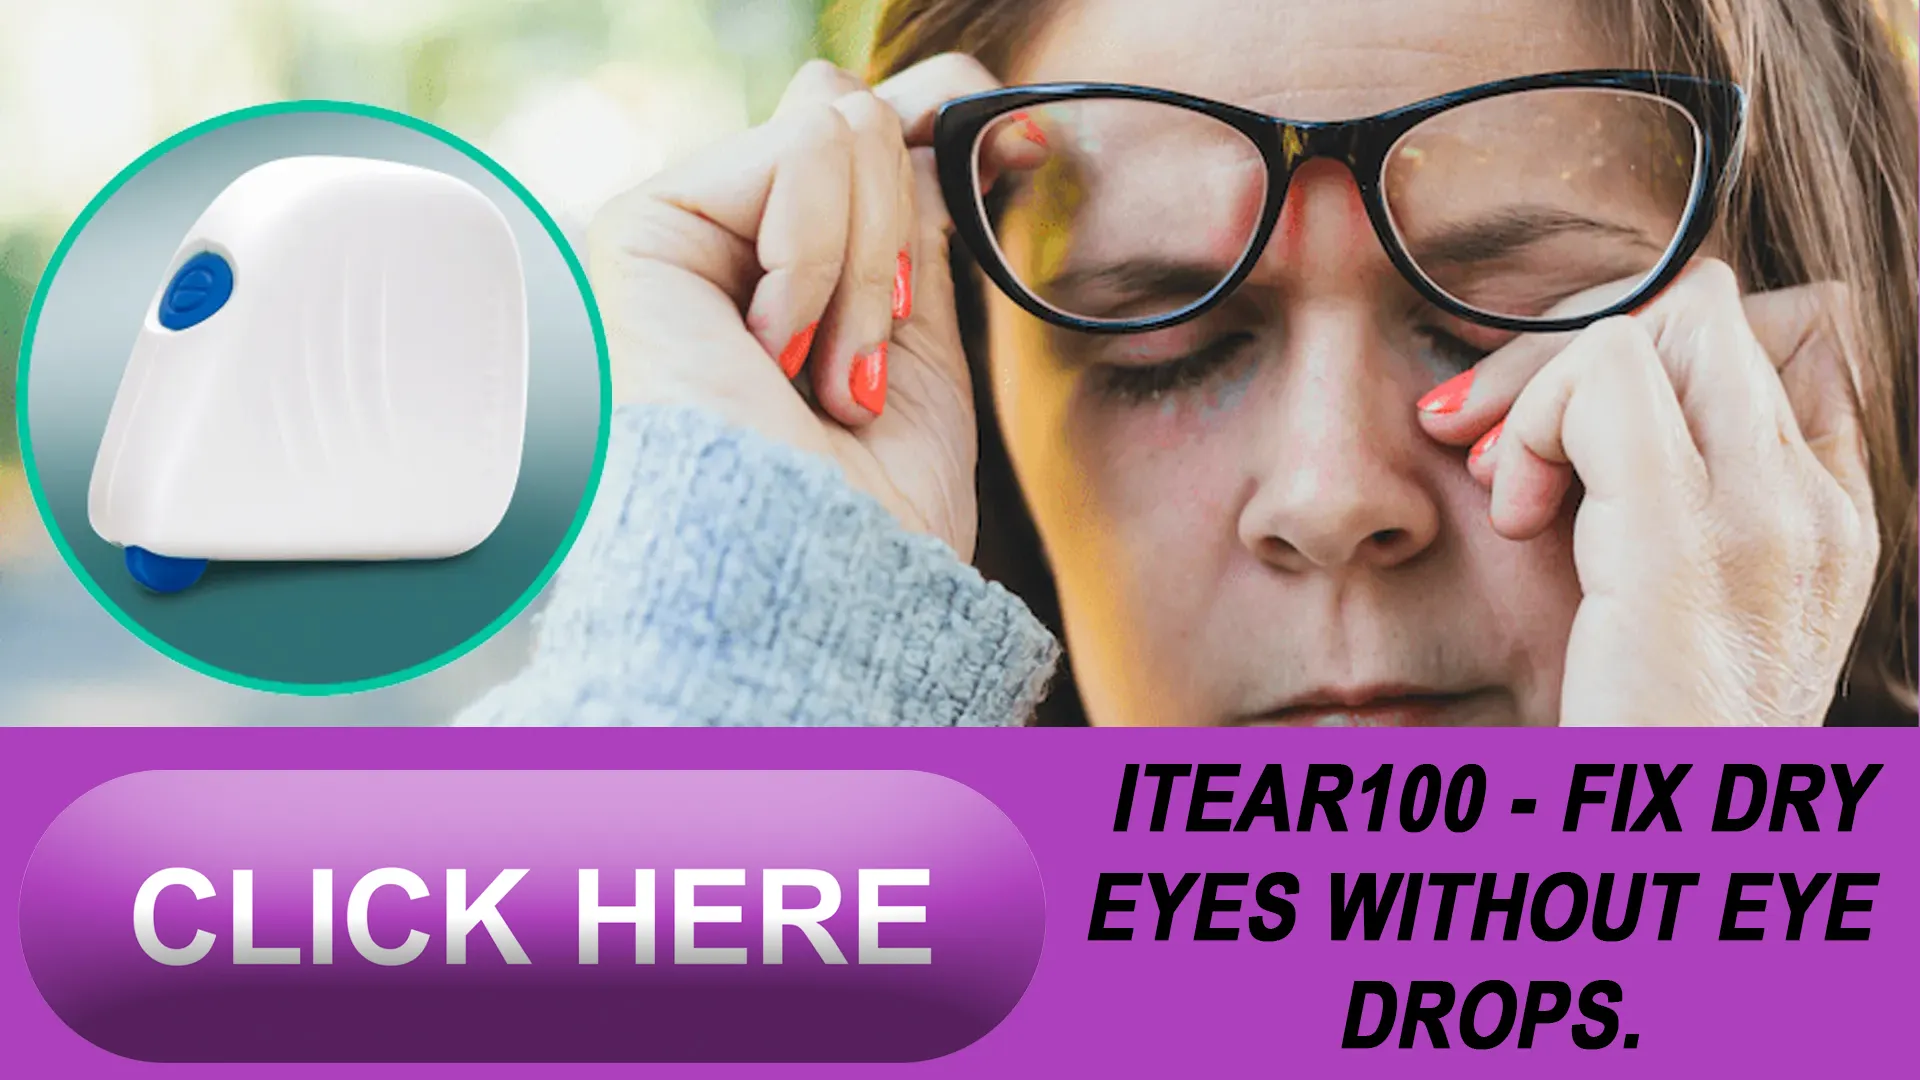 The Varied Signs and Symptoms of Dry Eye